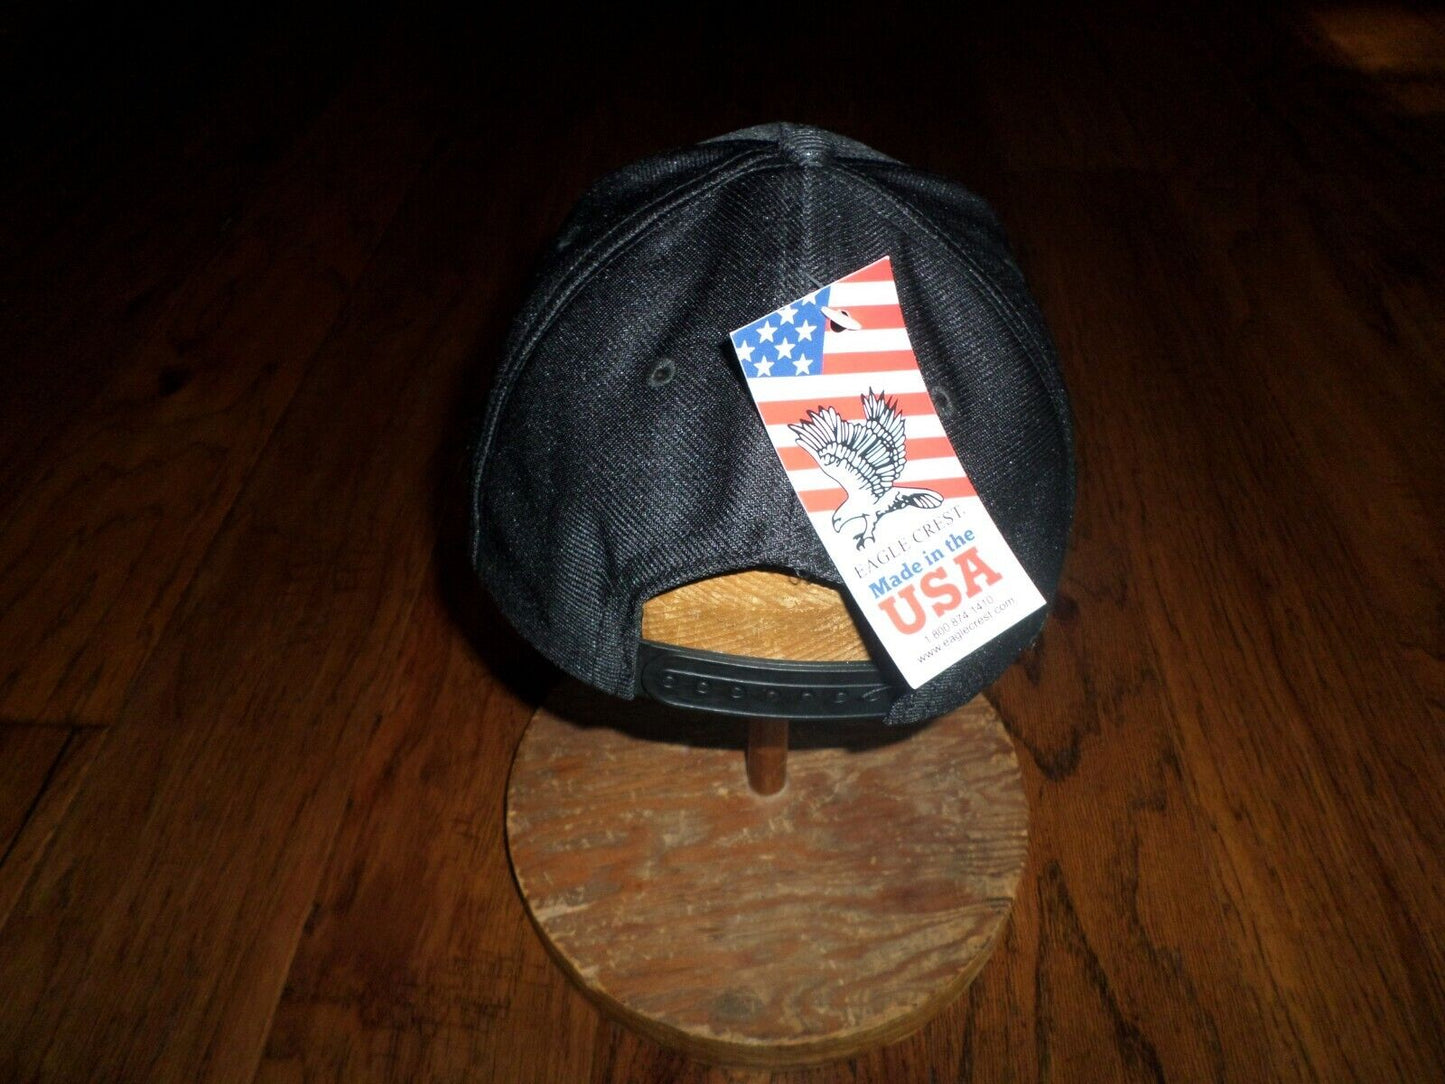 U.S MILITARY FIFTH ARMY HAT U.S MILITARY OFFICIAL BALL CAP U.S.A MADE 5th ARMY